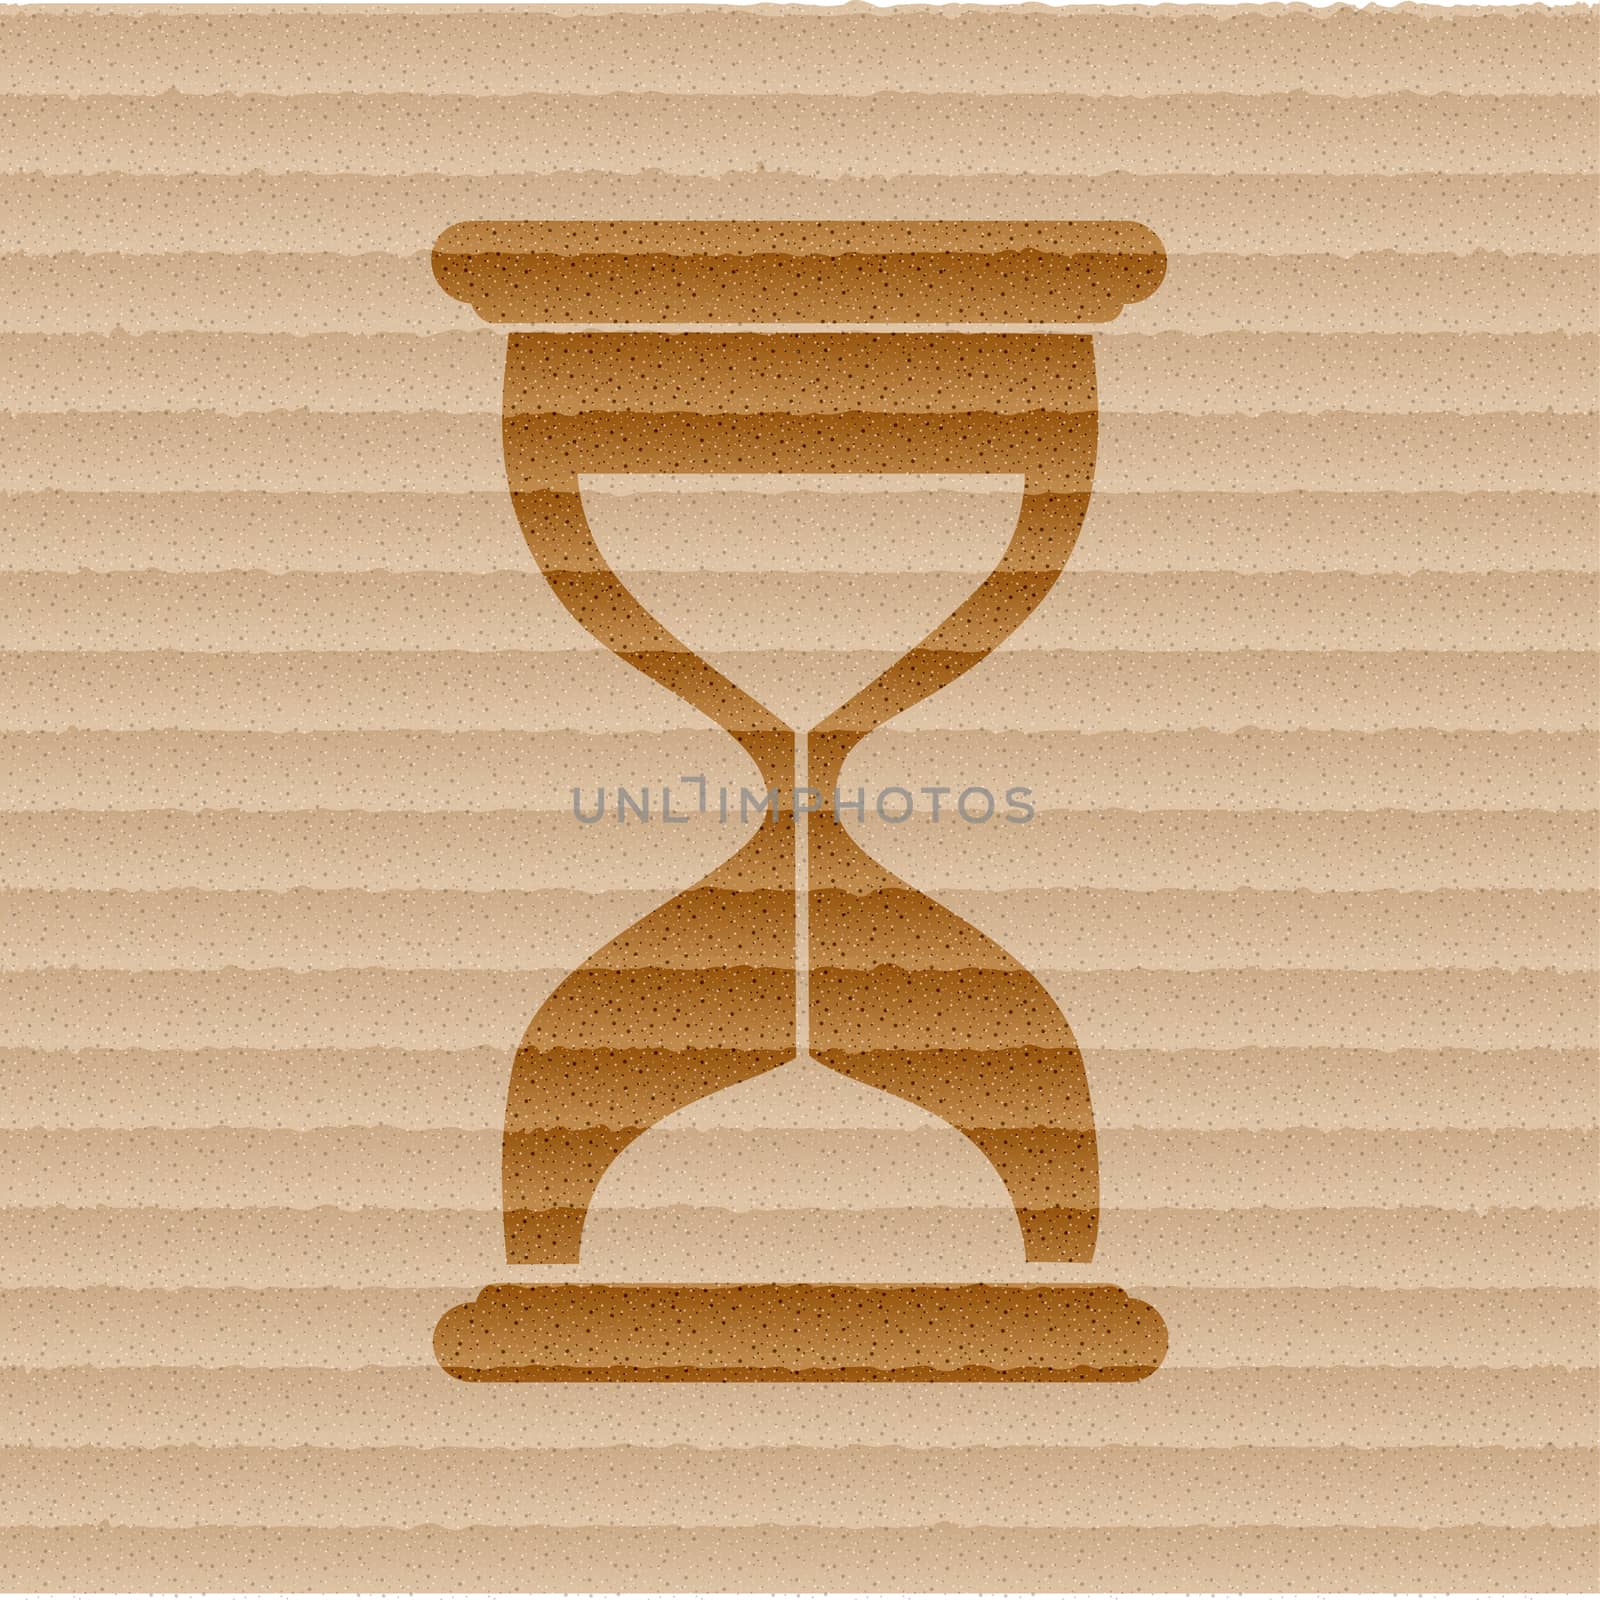 Hourglass time icon flat design with abstract background.